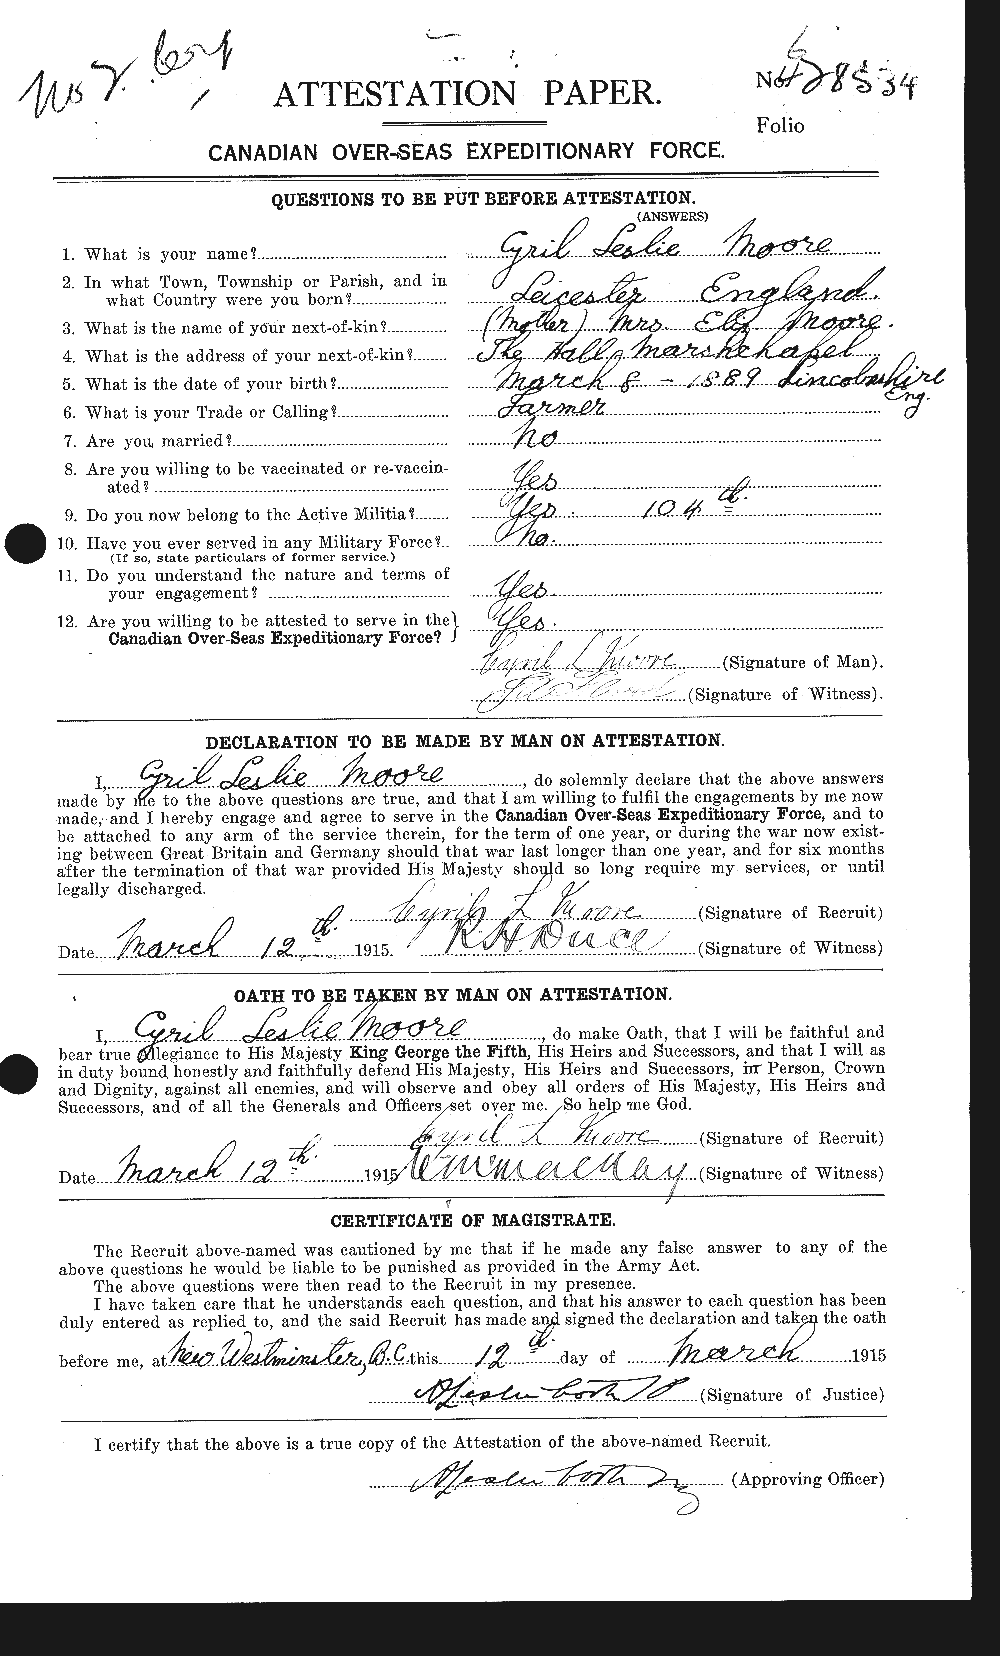 Personnel Records of the First World War - CEF 506559a